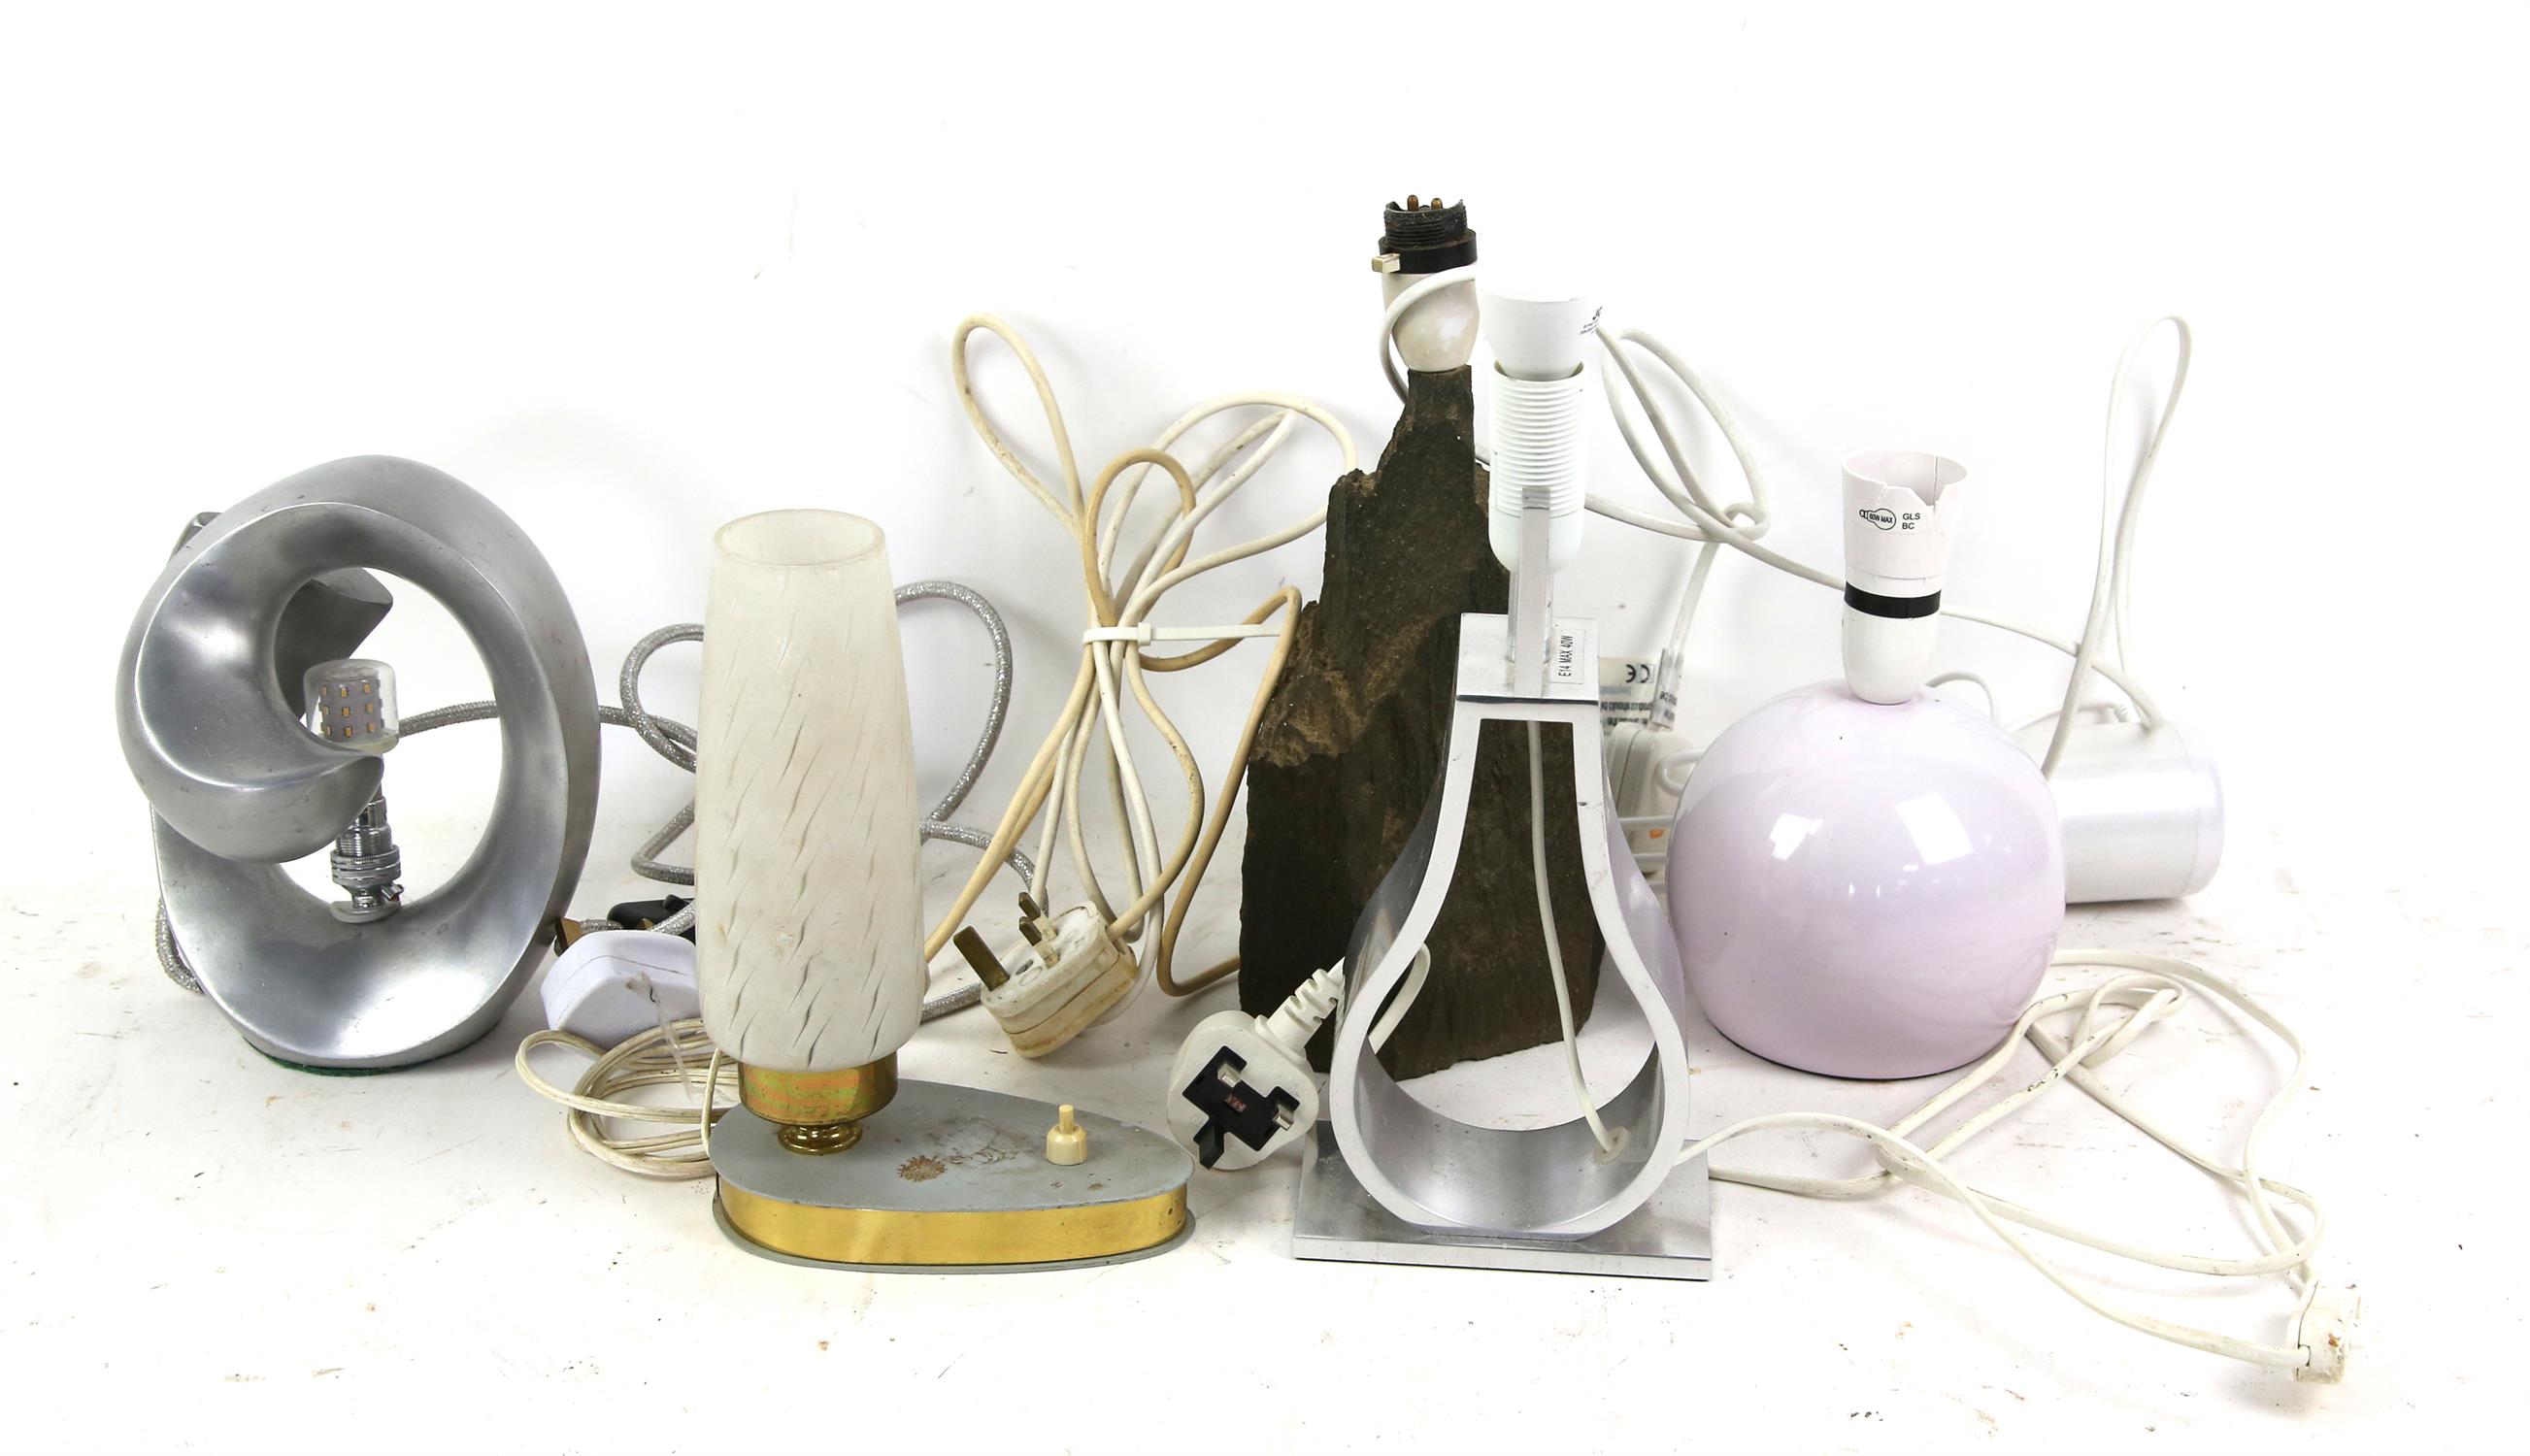 Variety of six lamps to include a vintage 1960's lamp, an abstract sculpture lamp in metal and a